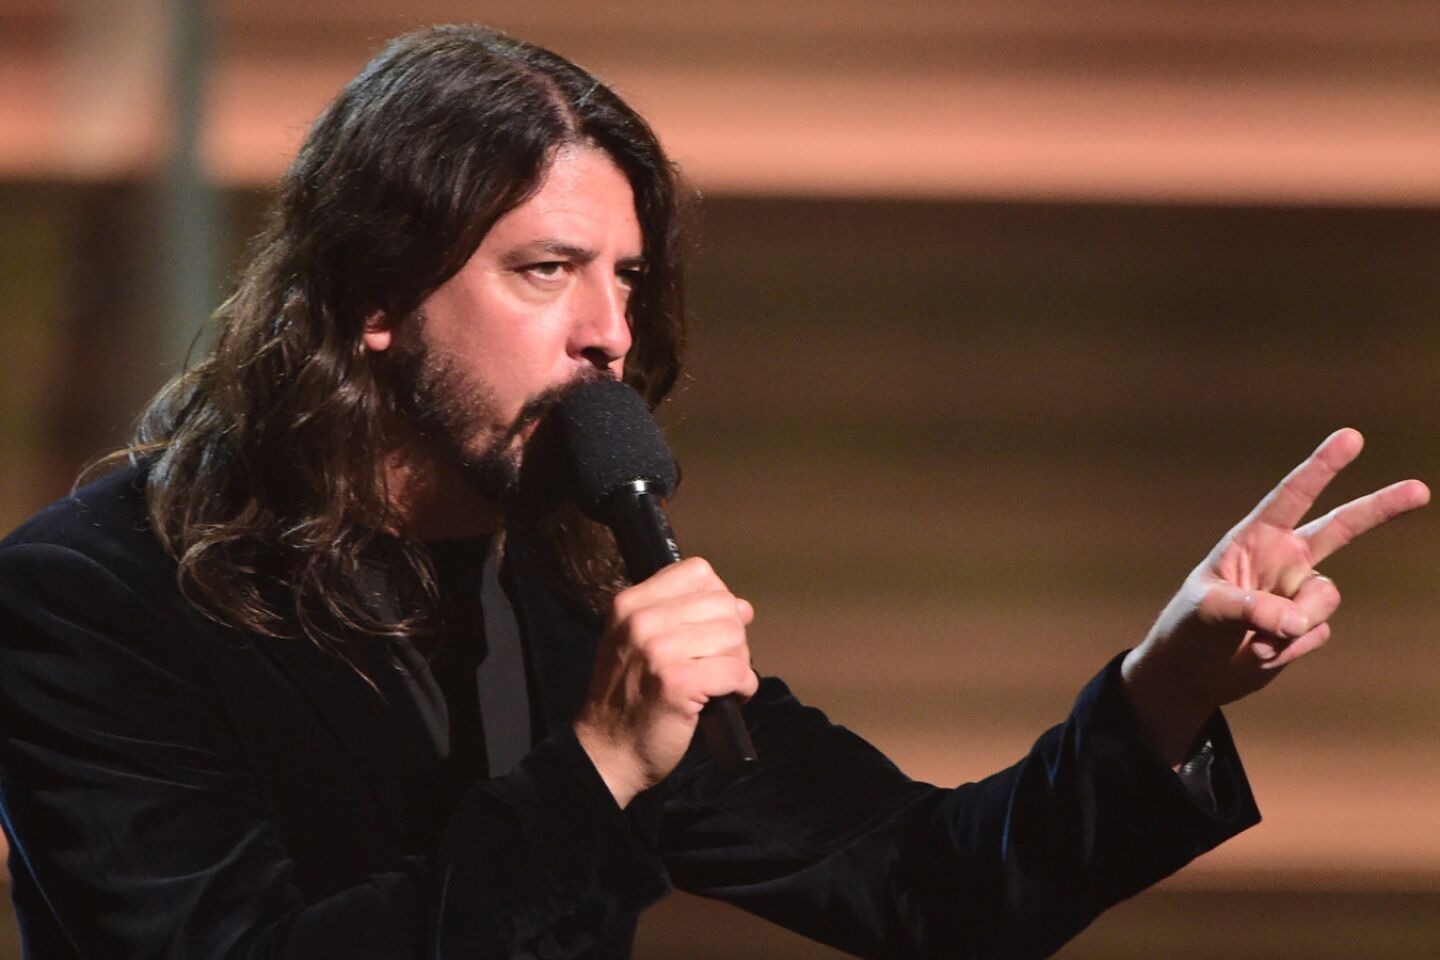 Musician Dave Grohl takes the stage.